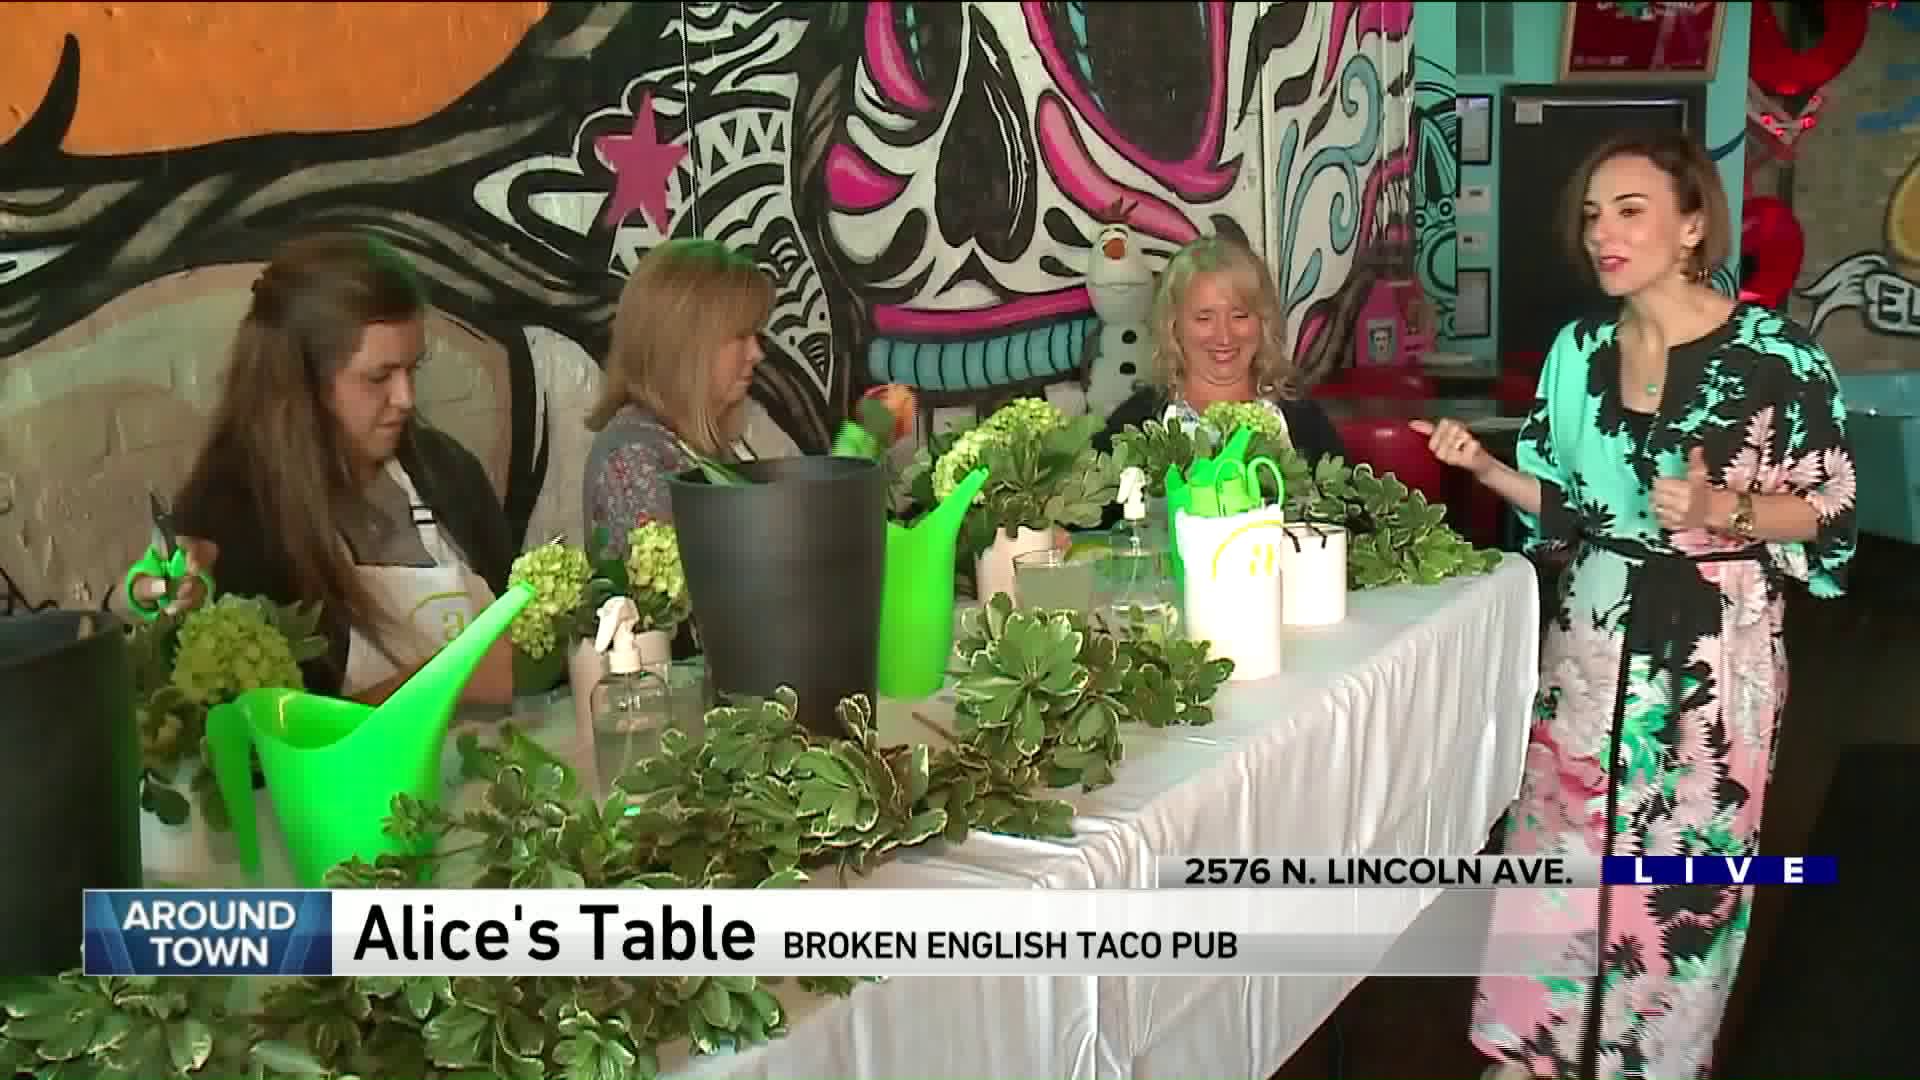 Around Town arranges flowers with Alice’s Table